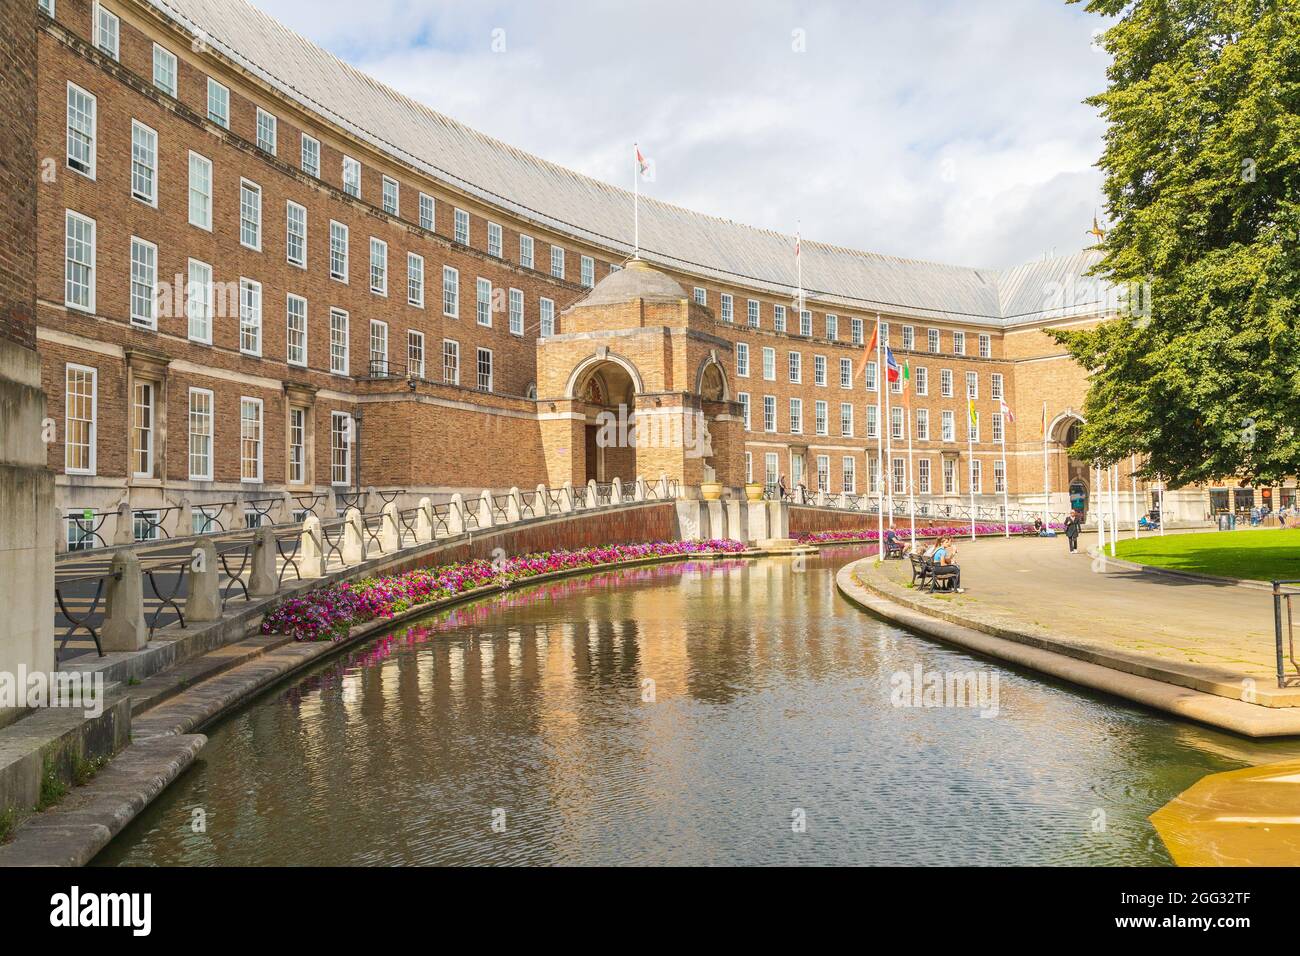 BRISTOL, UK - 19TH AUG 2021: The outside of Bristol City Hall during the day from near College Green. People can be seen. Stock Photo